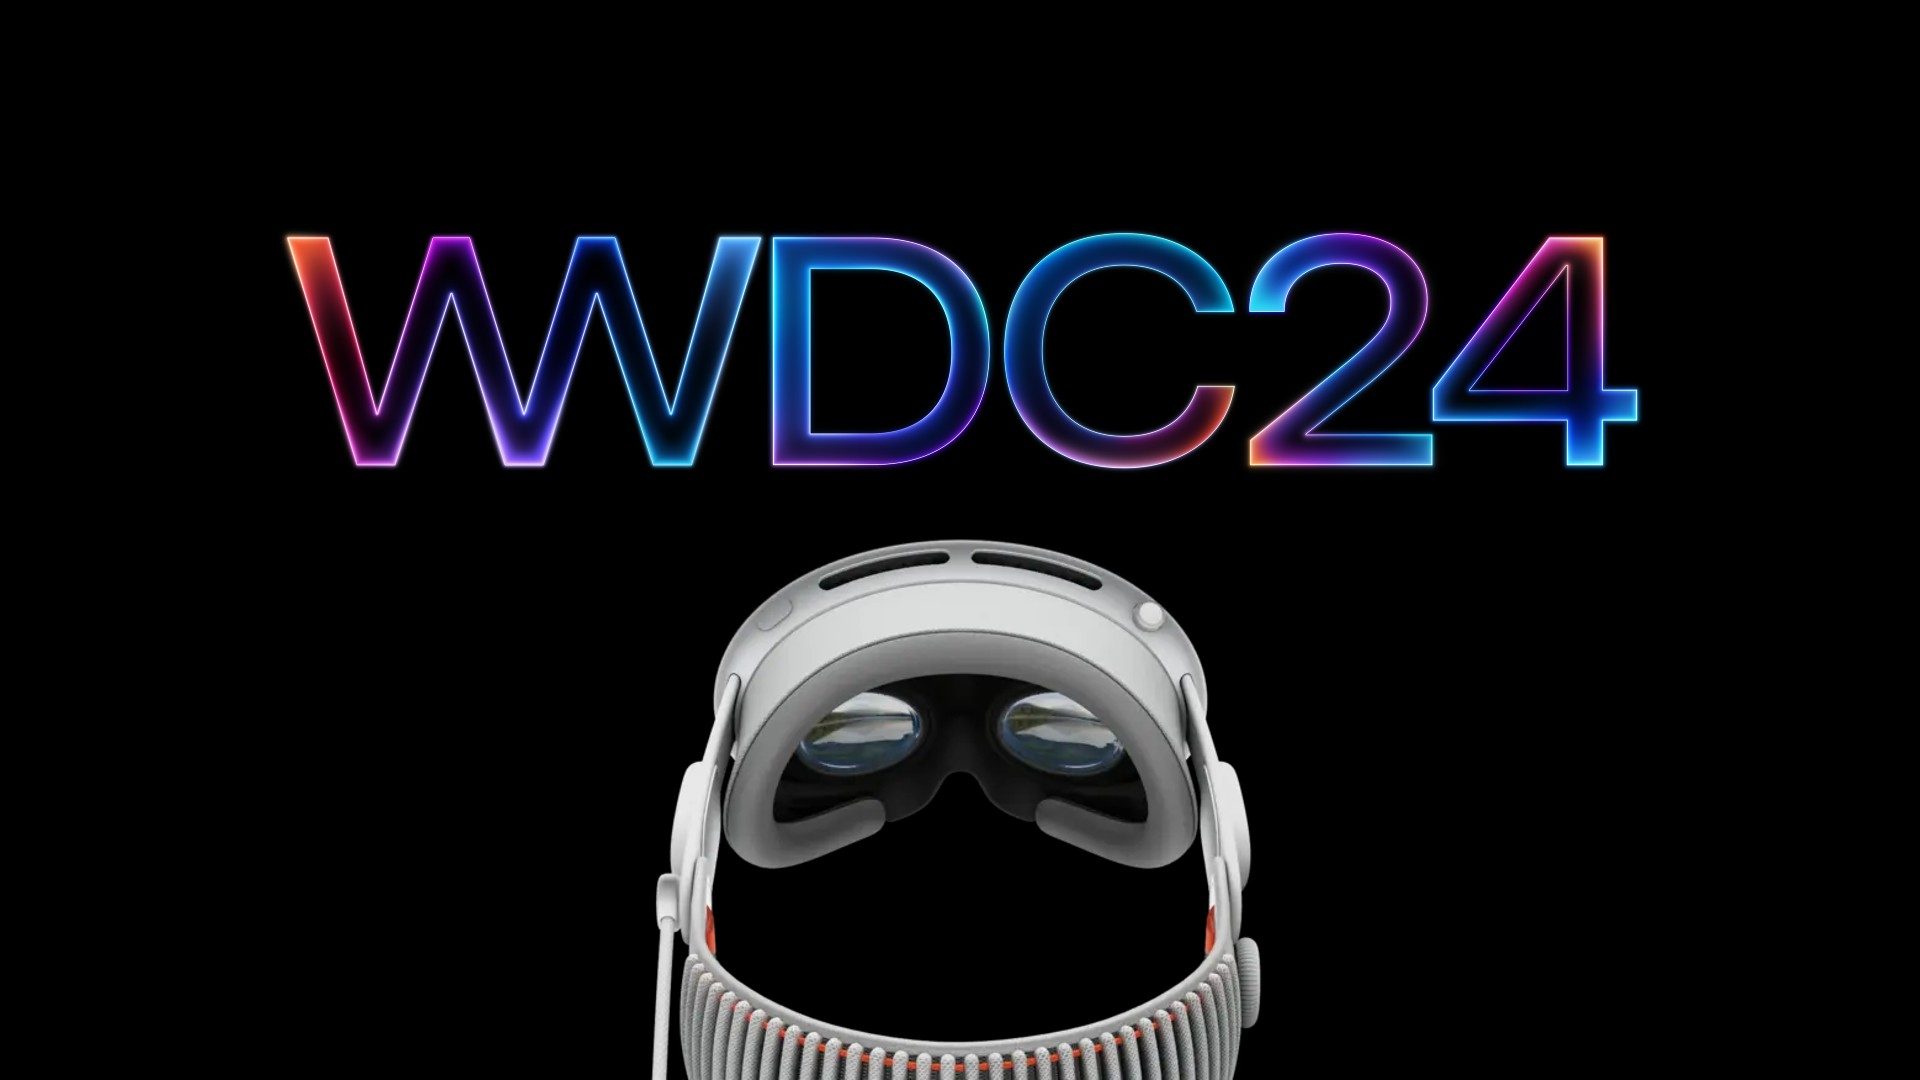 Apple Announces WWDC 2024 with Plans to Highlight “visionOS advancements”